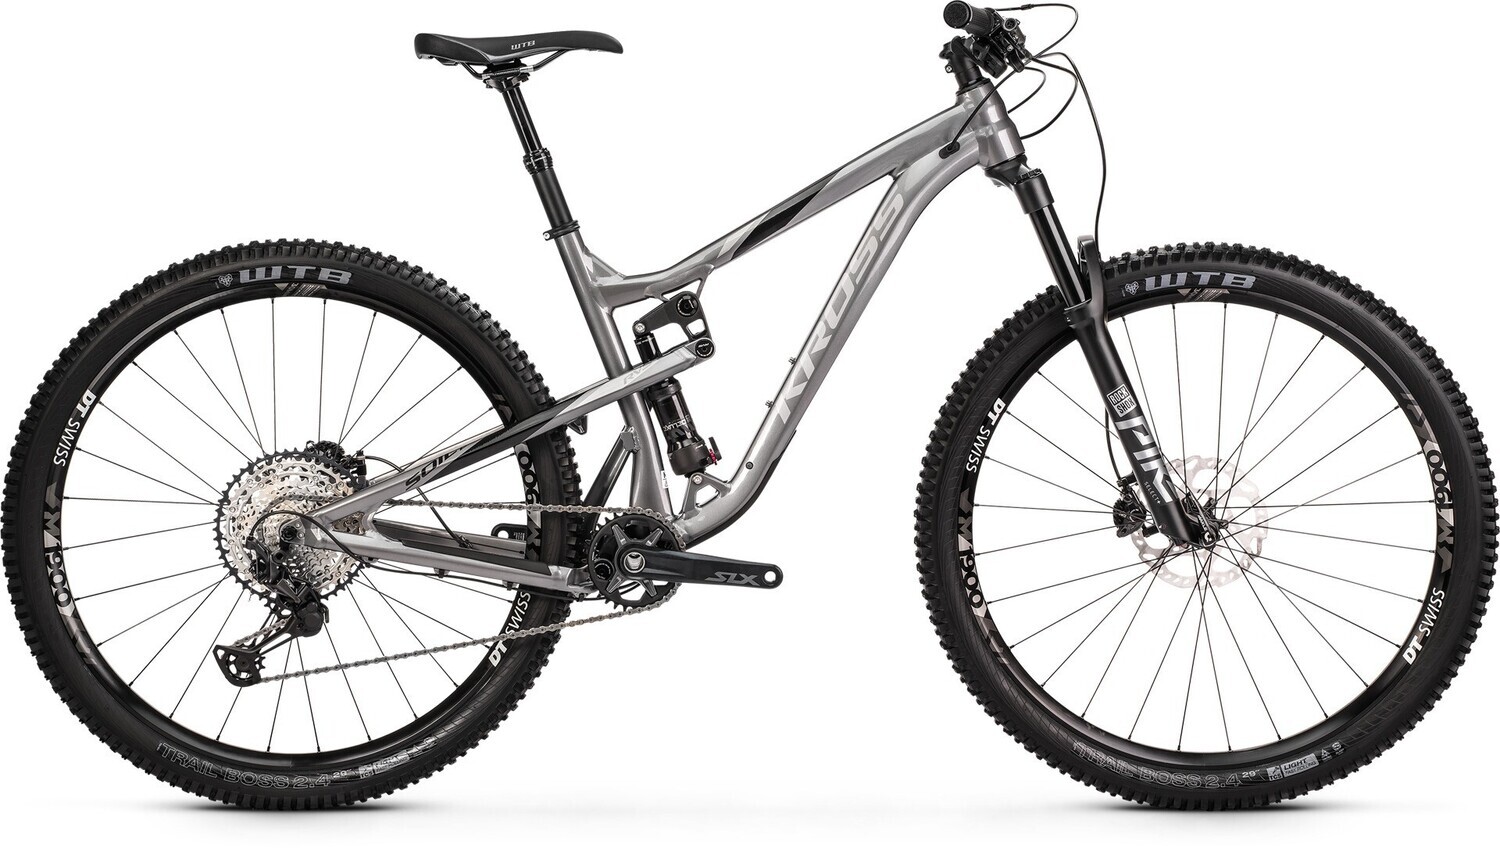 Kross Soil 2.0 2020 1X12 speed Shimano XT, SLX, Wheels DT Swiss 1900, Rock Shox Pike Select and Delux, (Graphite/Black glossy), Size Medium (Financiamiento Disponible)​